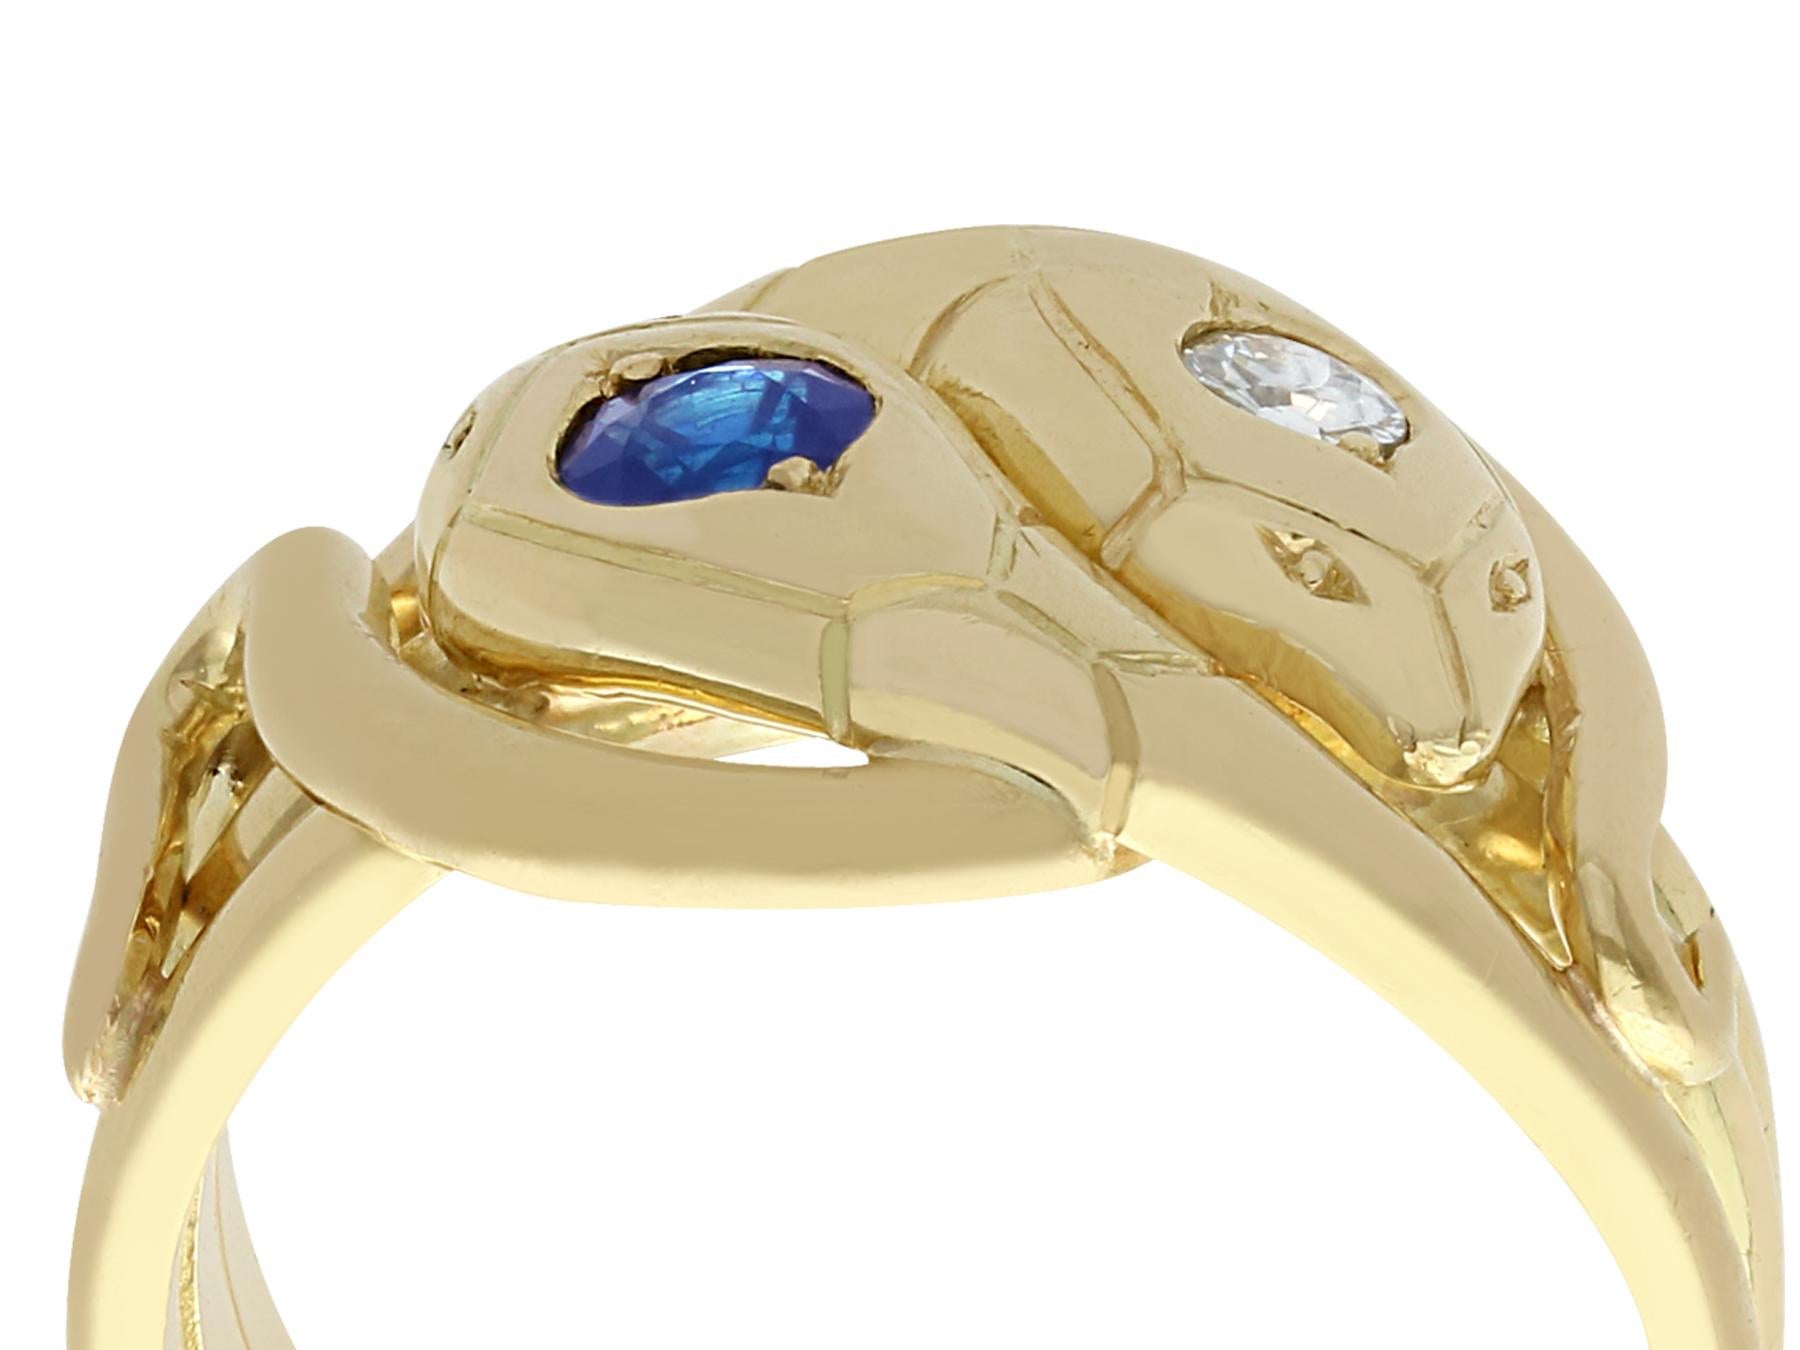 An exceptional antique European 0.28 carat sapphire and 0.10 carat diamond, 18 karat yellow gold snake ring; part of our diverse antique jewelry collections.

This exceptional, fine and impressive antique snake ring has been crafted in 18k yellow